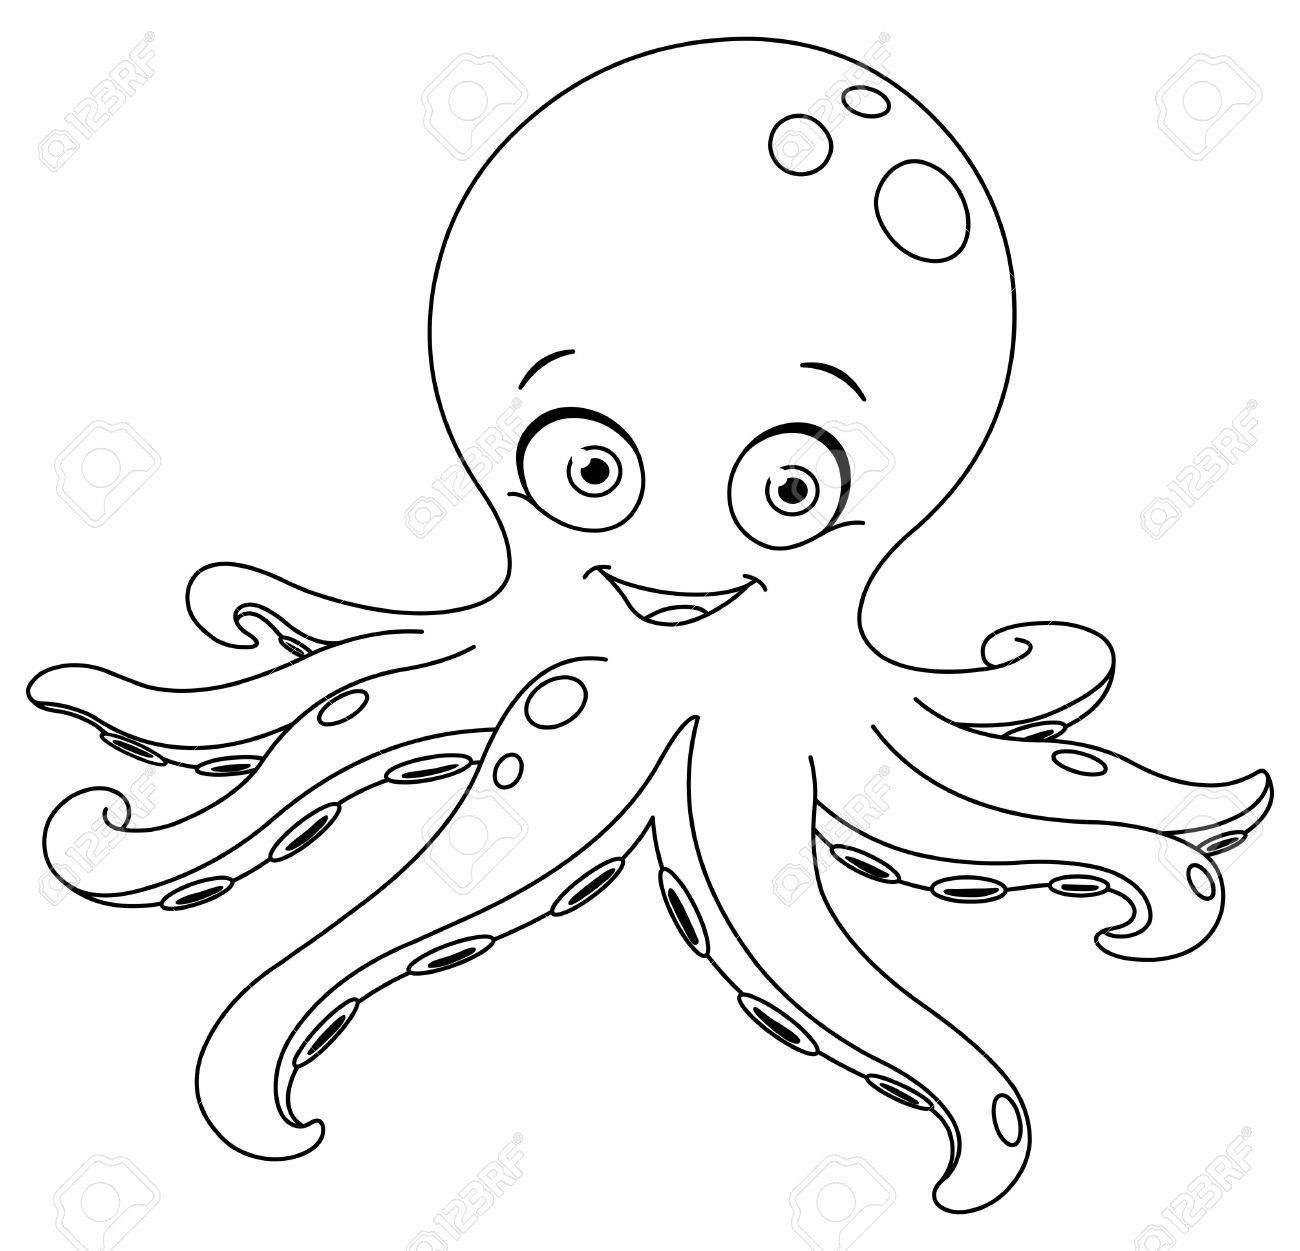 Cute octopus clipart black and white